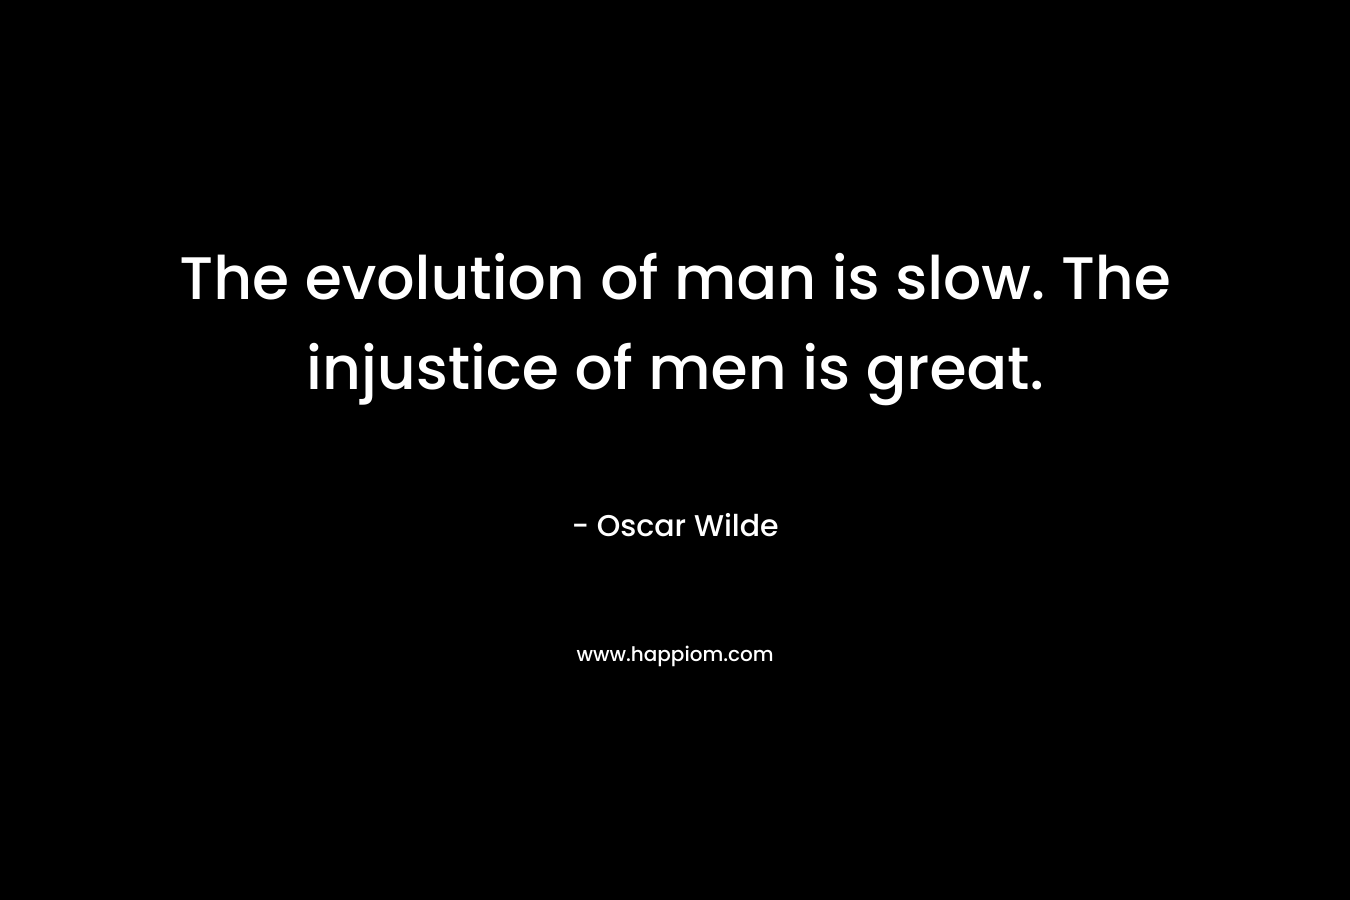 The evolution of man is slow. The injustice of men is great.